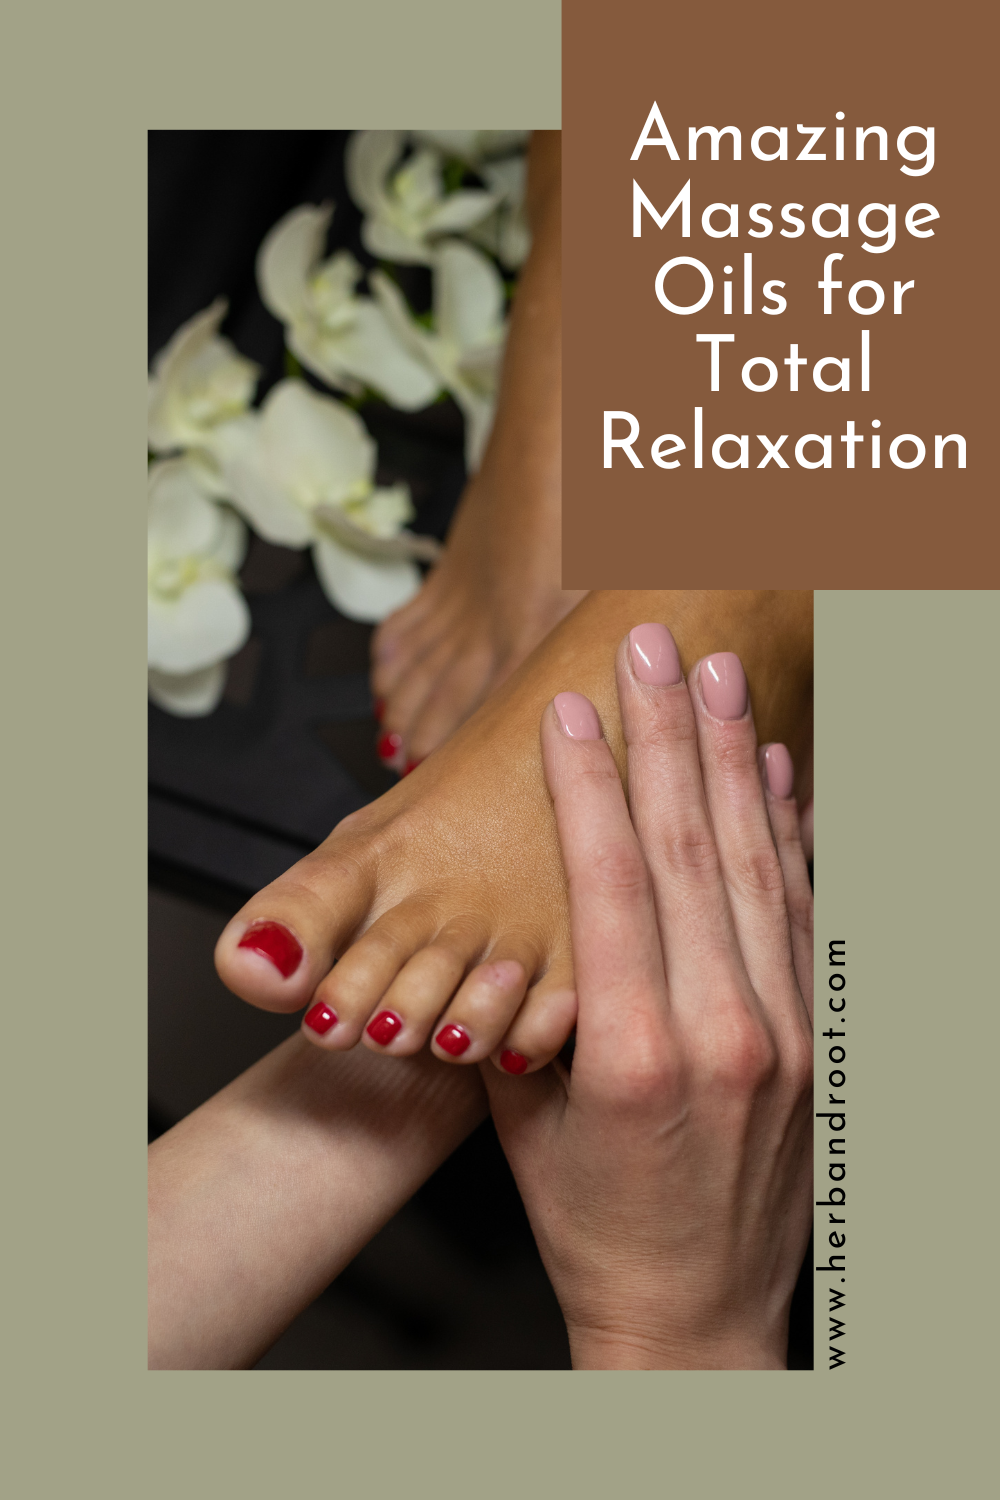 Let Go of Your Stress: Amazing Massage Oils for Total Relaxation